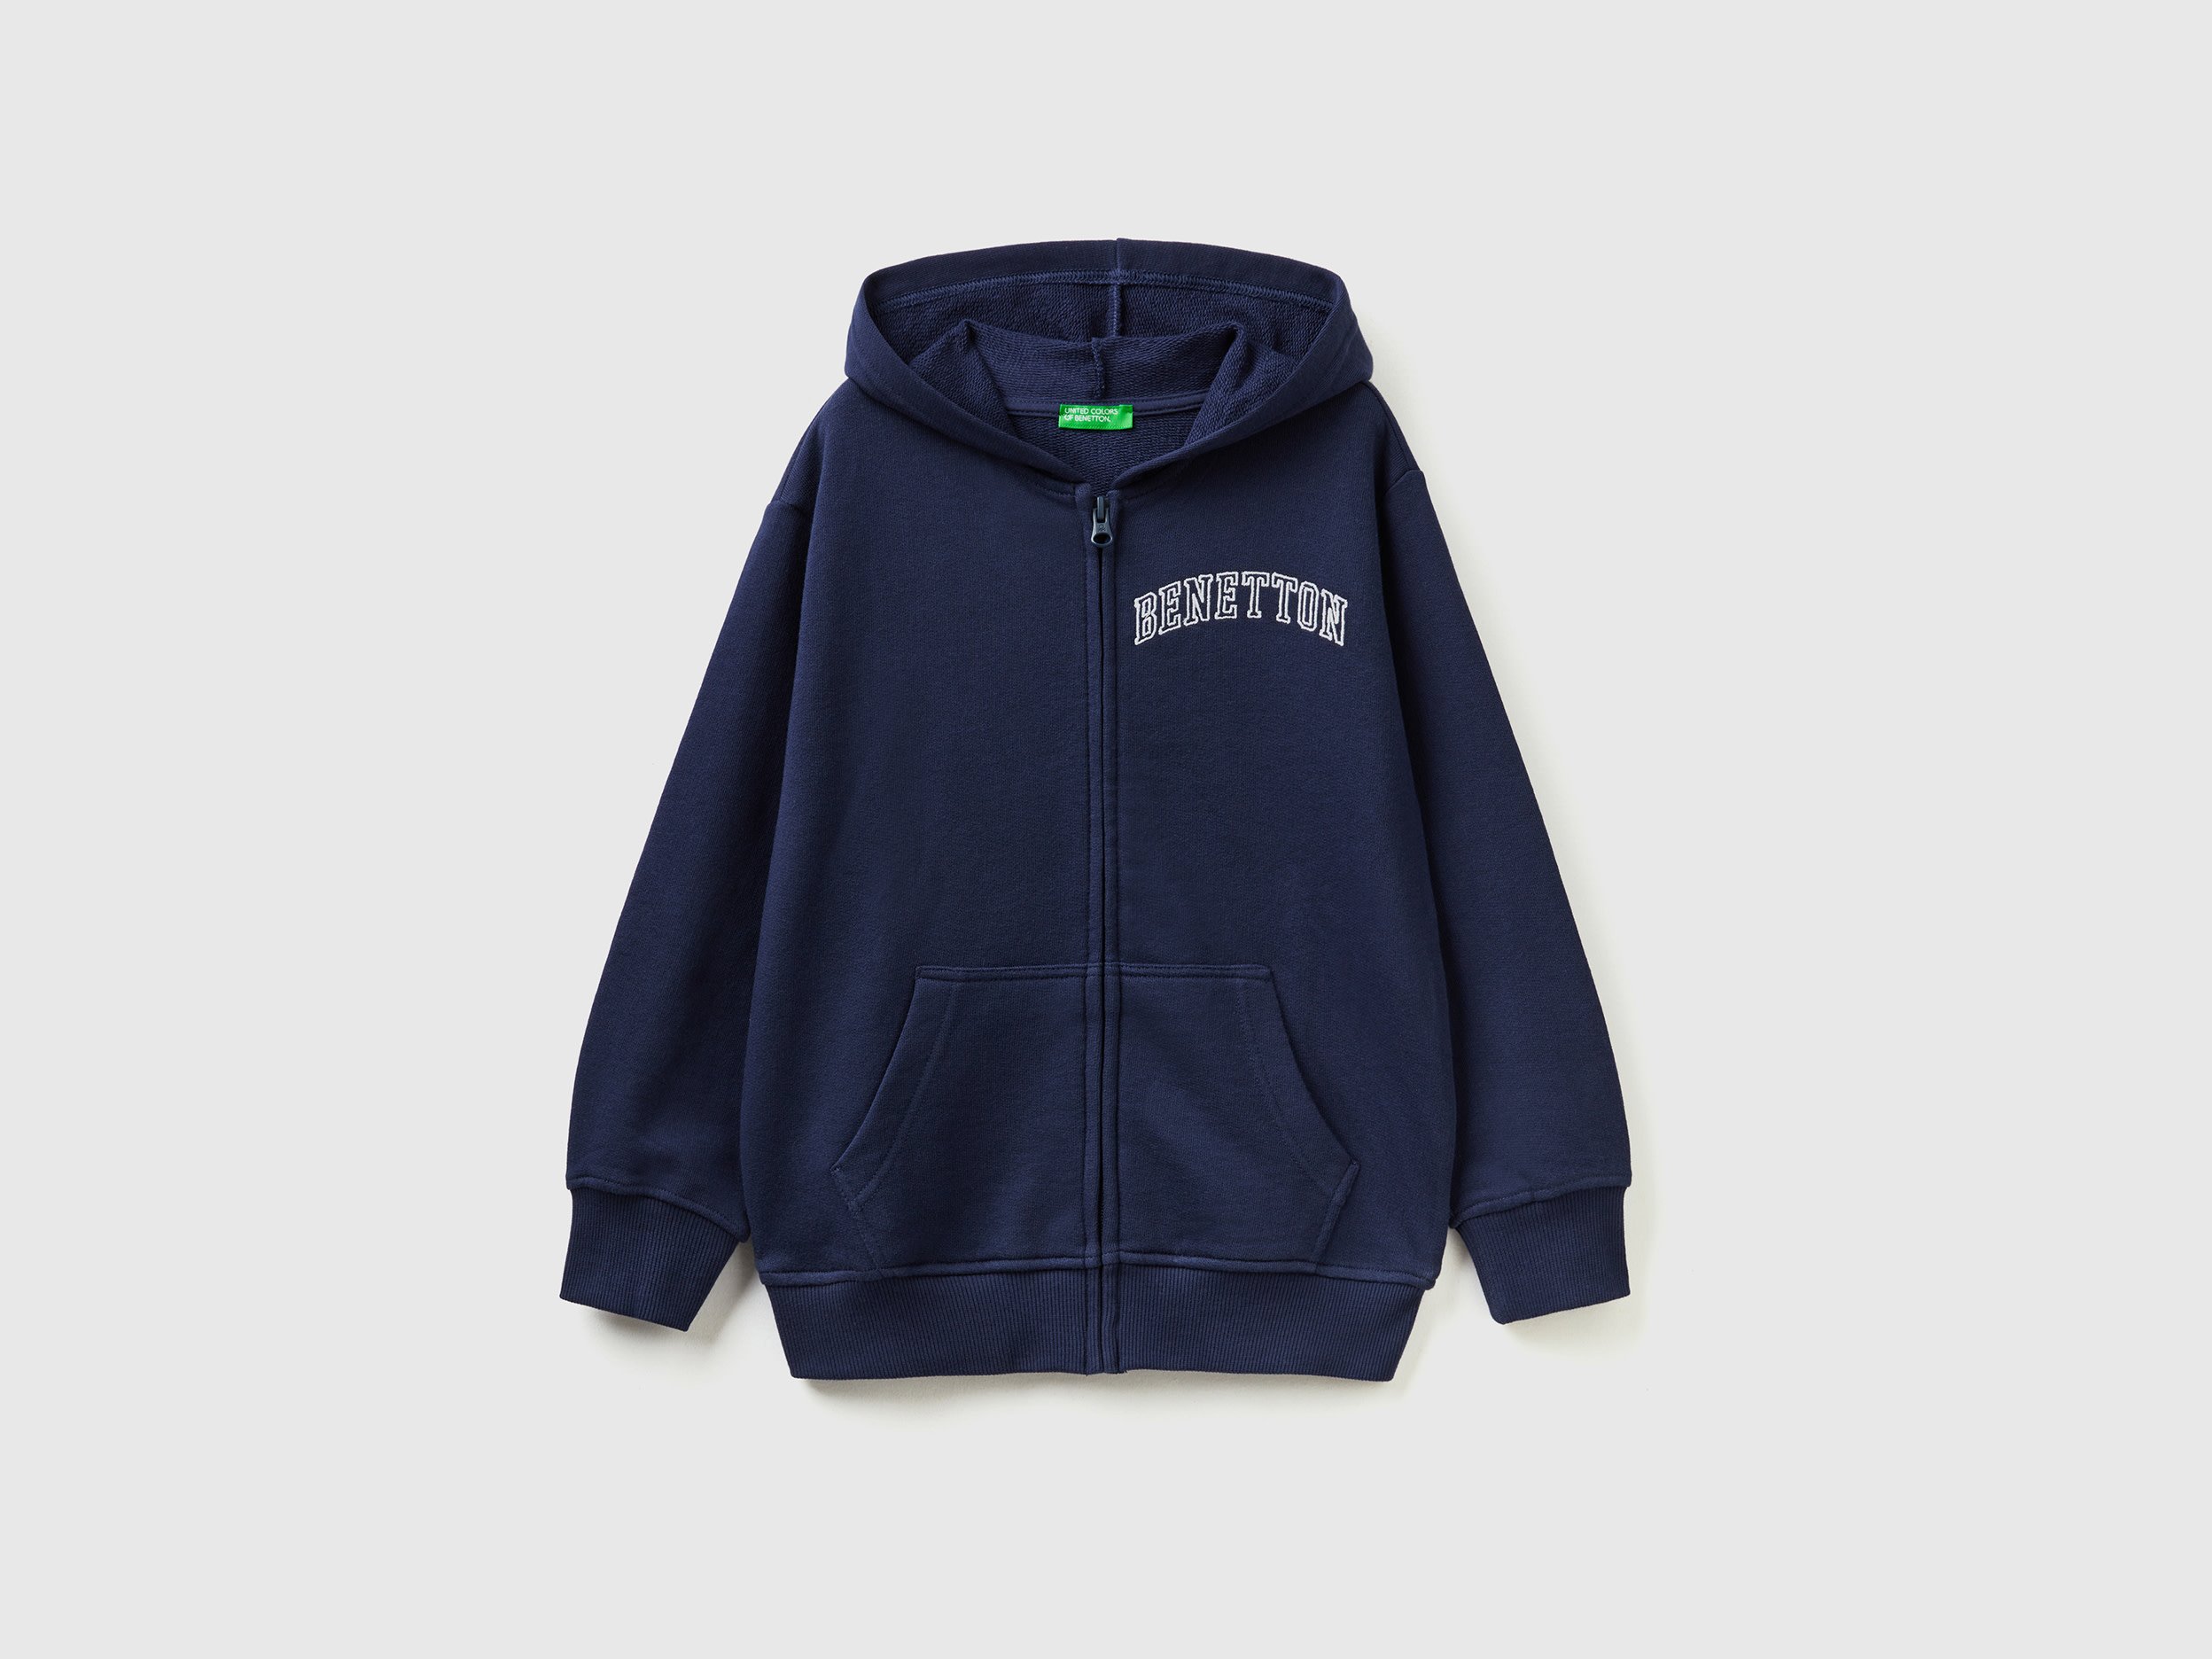 Benetton, Hoodie With Zip And Embroidered Logo, size S, Dark Blue, Kids